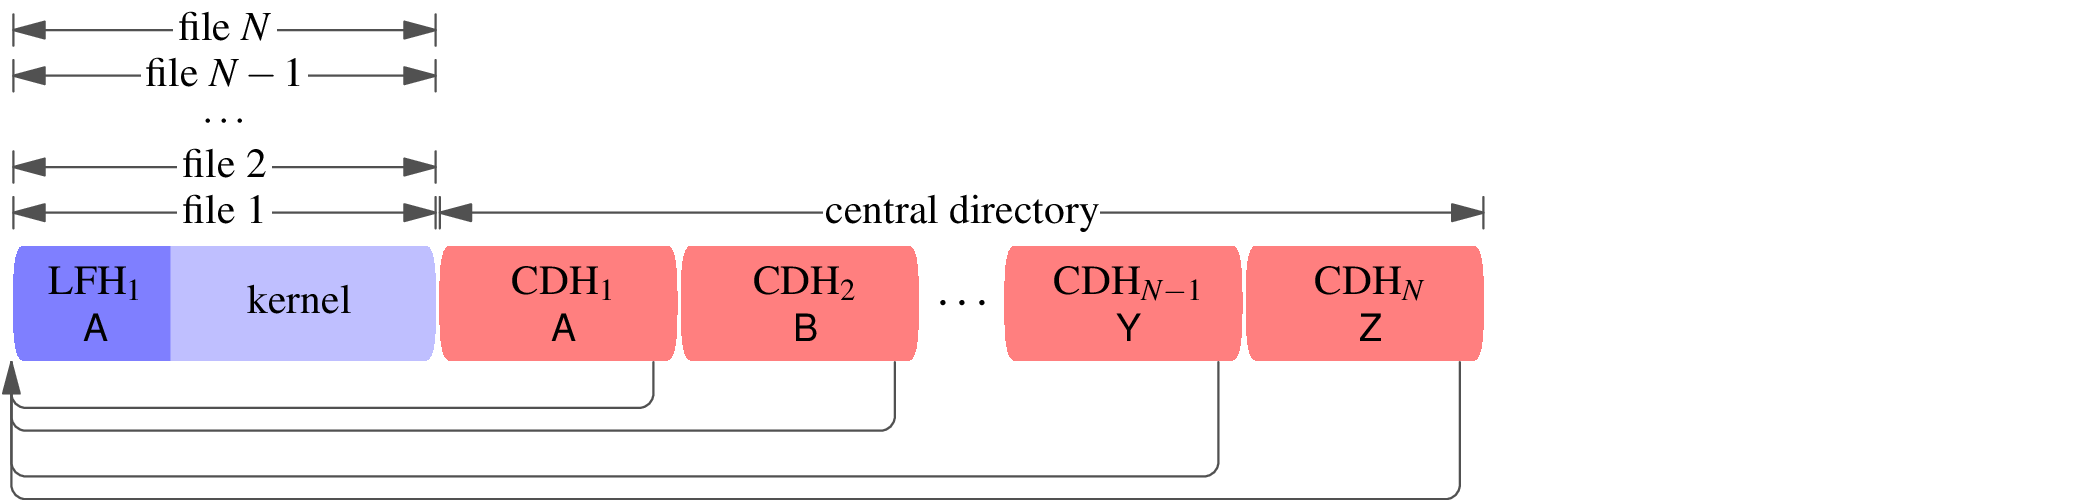 A block diagram of a zip file with fully overlapping files. The central directory header consists of central directory headers CDH[1], CDH[2], ..., CDH[N−1], CDH[N], with filenames A, B, ..., Y, Z. There is a single local file header LFH[1] with filename A whose file data is a compressed kernel. Every one of the central directory headers points backwards to the same local file header, LFH[1]. The lone file is multiply labeled file 1, file 2, ..., file N−1, file N.